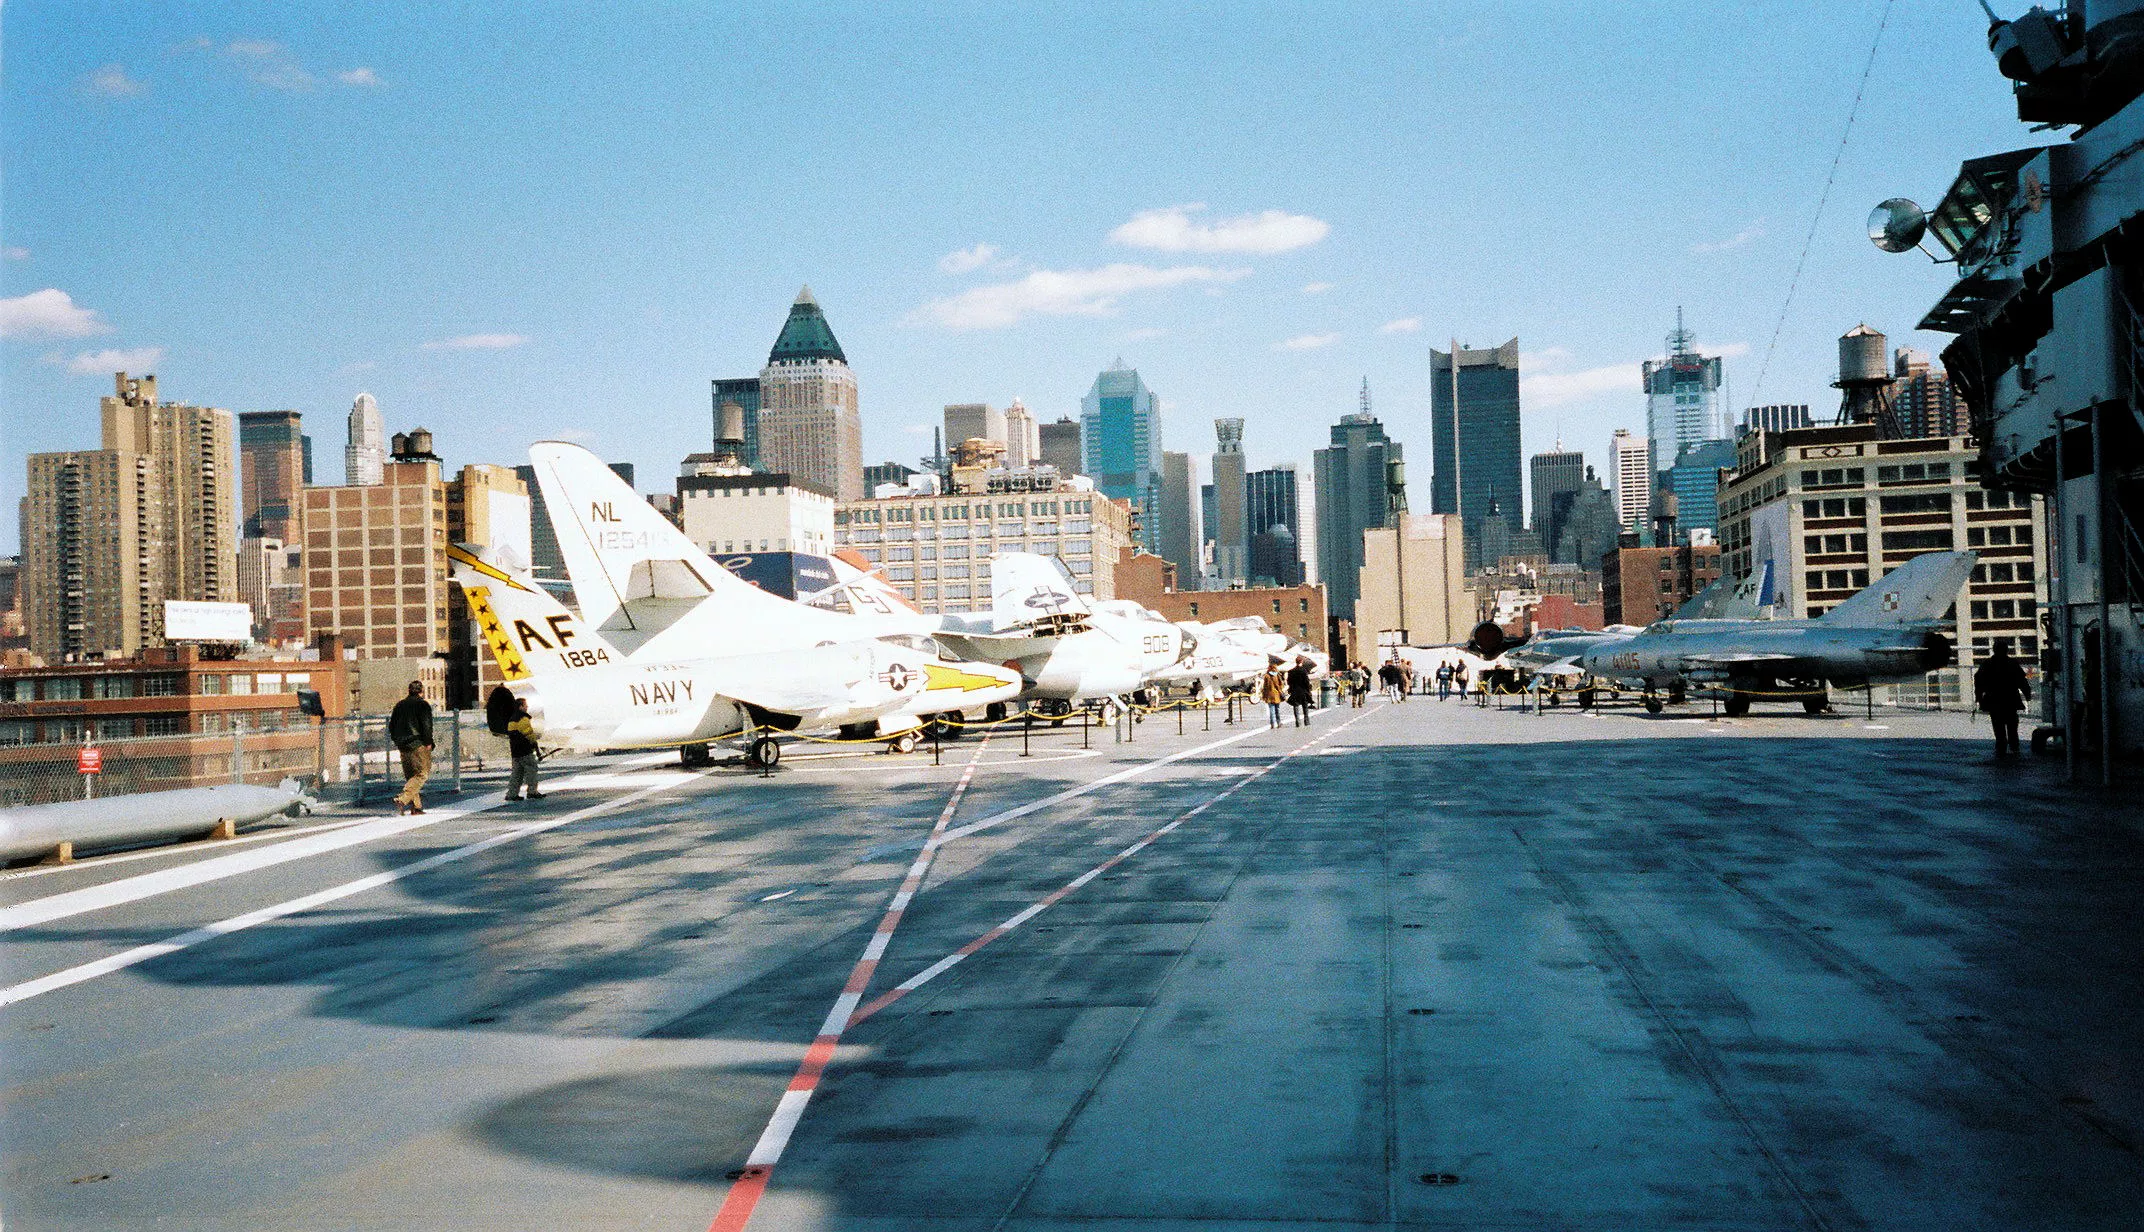 Intrepid Sea, Air & Space Museum in USA, North America | Museums - Rated 4.5